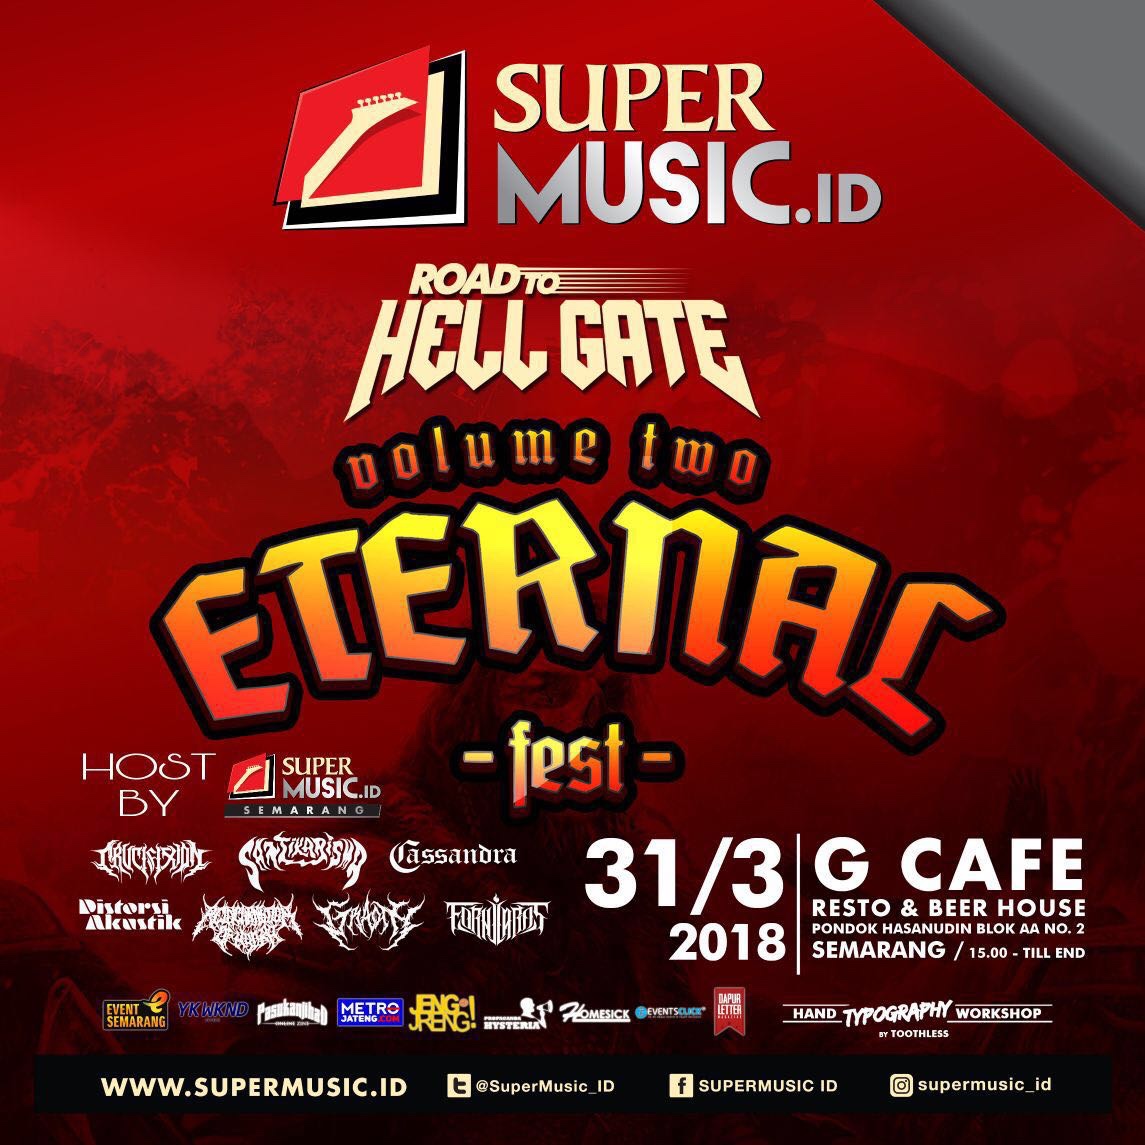 EVENT SEMARANG - SUPER MUSIC.ID ROAD TO HELL GATE 